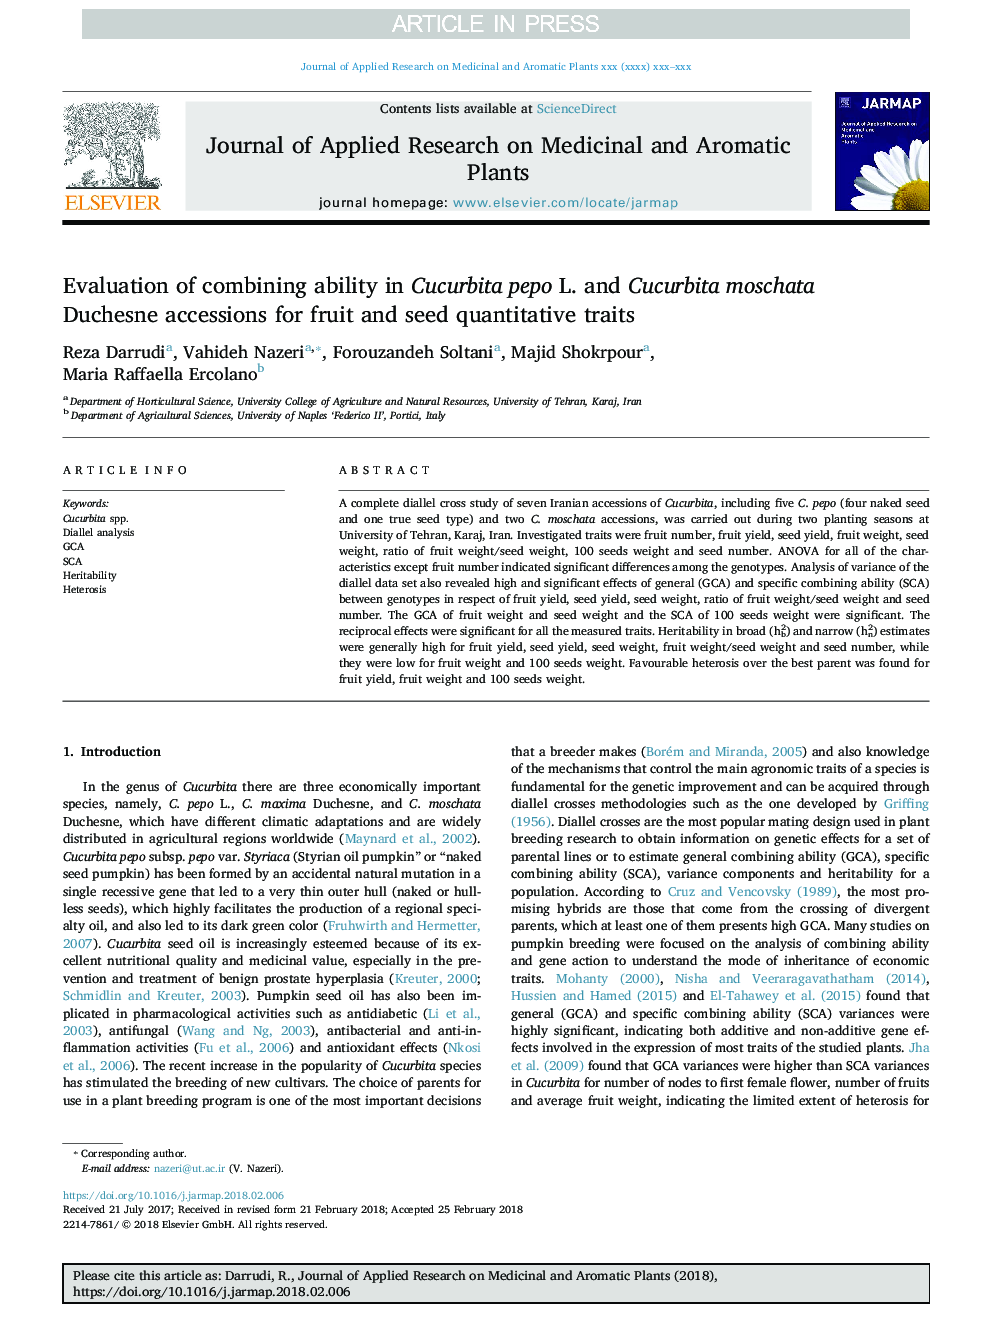 Evaluation of combining ability in Cucurbita pepo L. and Cucurbita moschata Duchesne accessions for fruit and seed quantitative traits